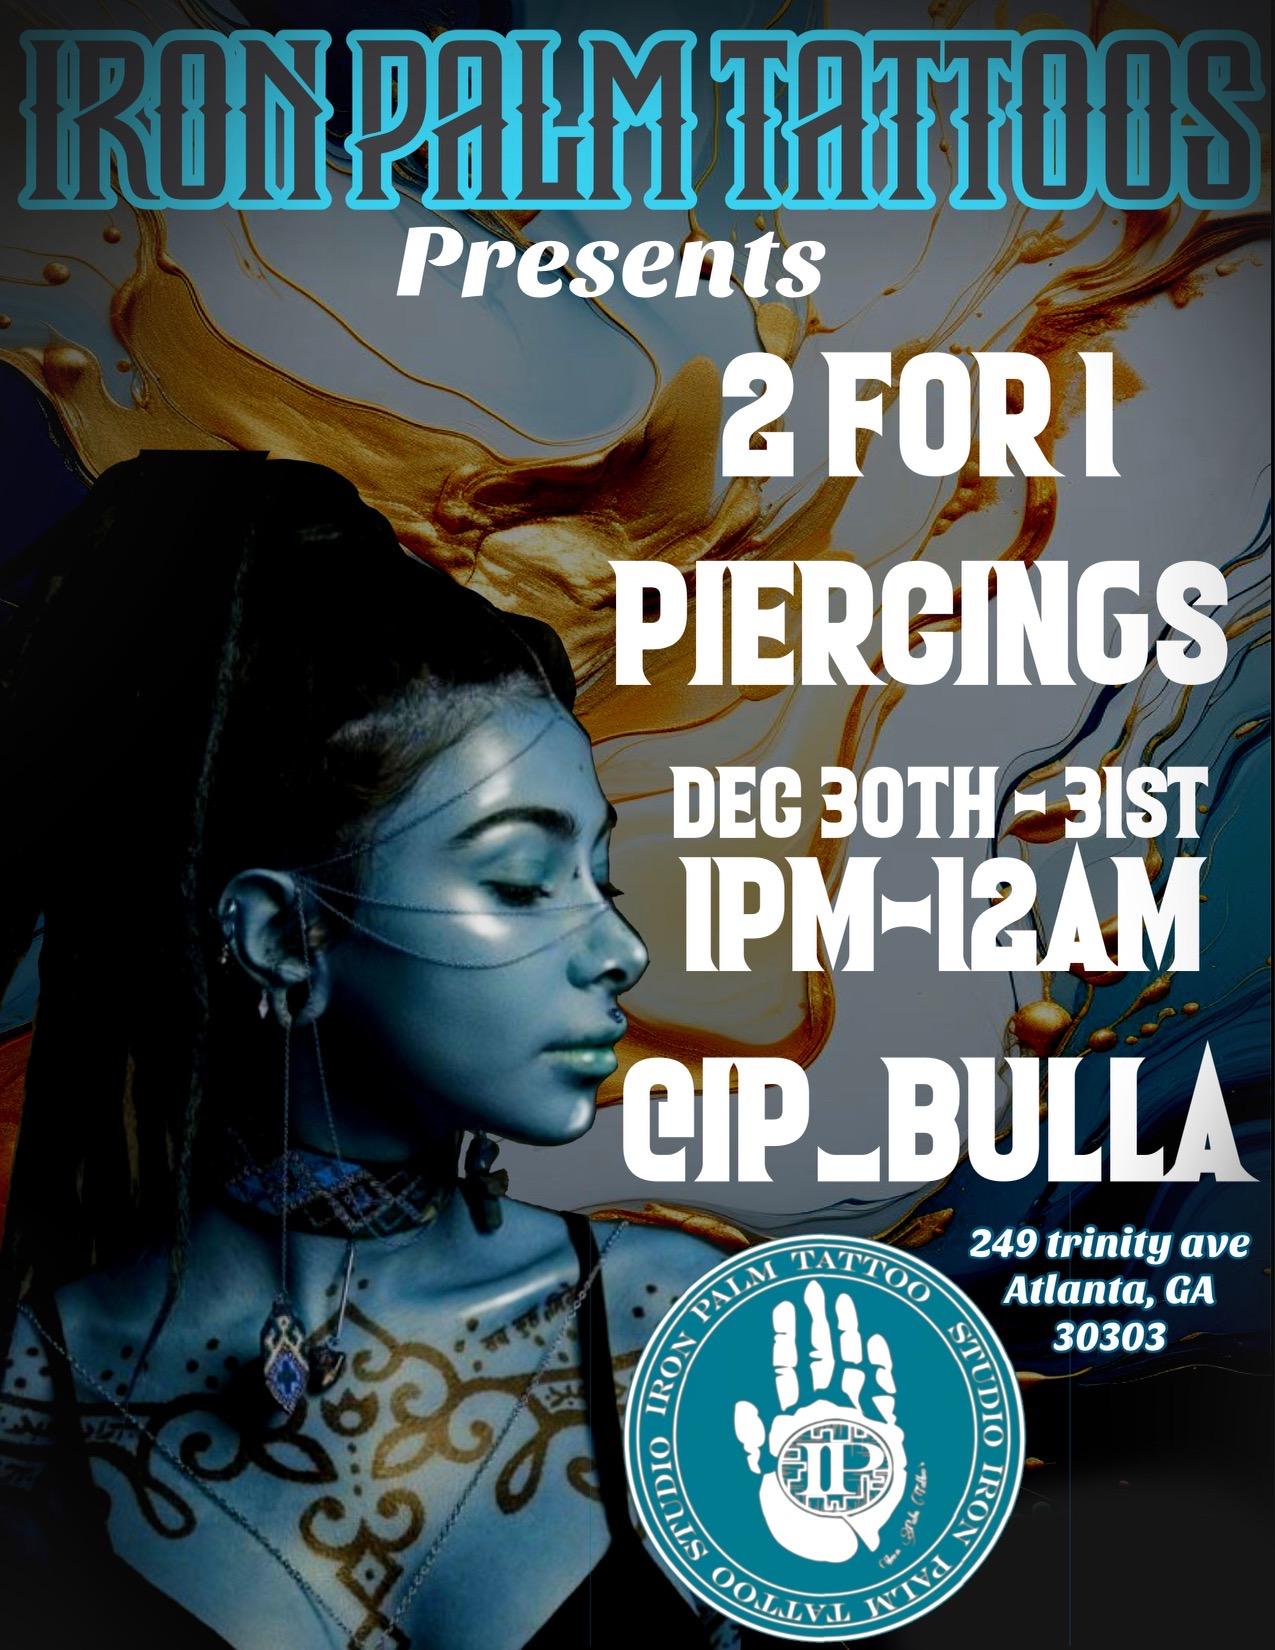 Get two piercings for the price of one body piercing at Iron Palm Tattoos in downtown Atlanta Dec 30 -31. Jewelry is included free with each body piercing service. REQUIREMENTS: Follow any Iron Palm Social Media account. Walk in before 12AM Dec 30th or Dec 31st 2024.